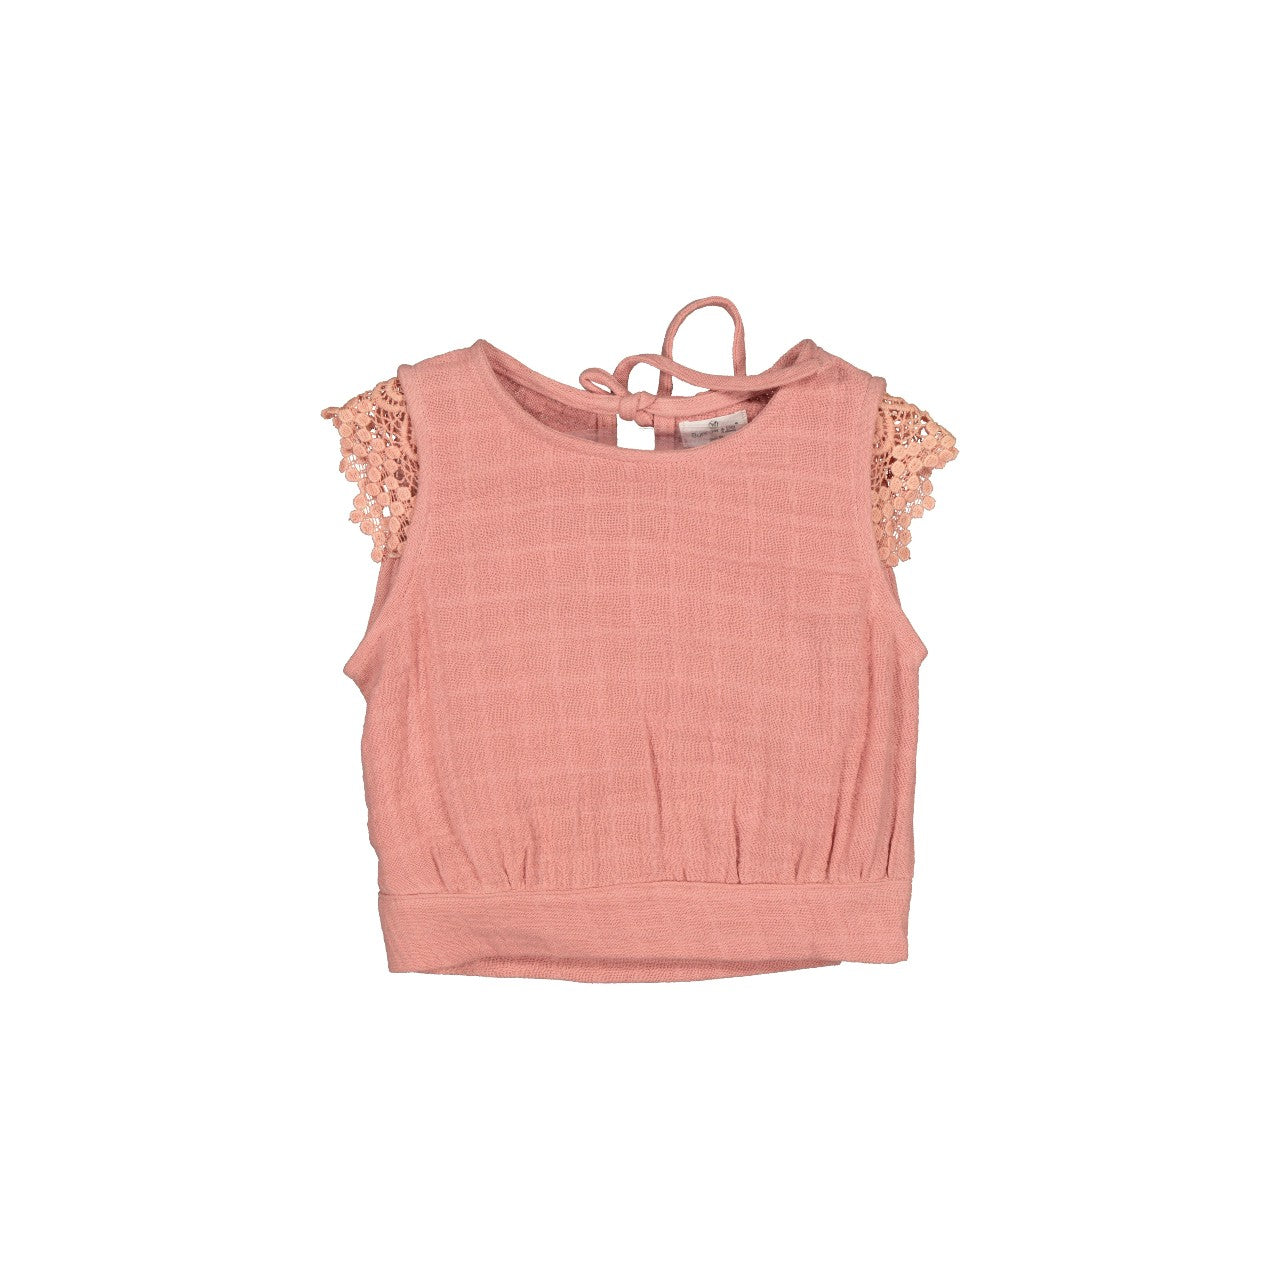 Fleur Singlet - Rose Tan With Lace